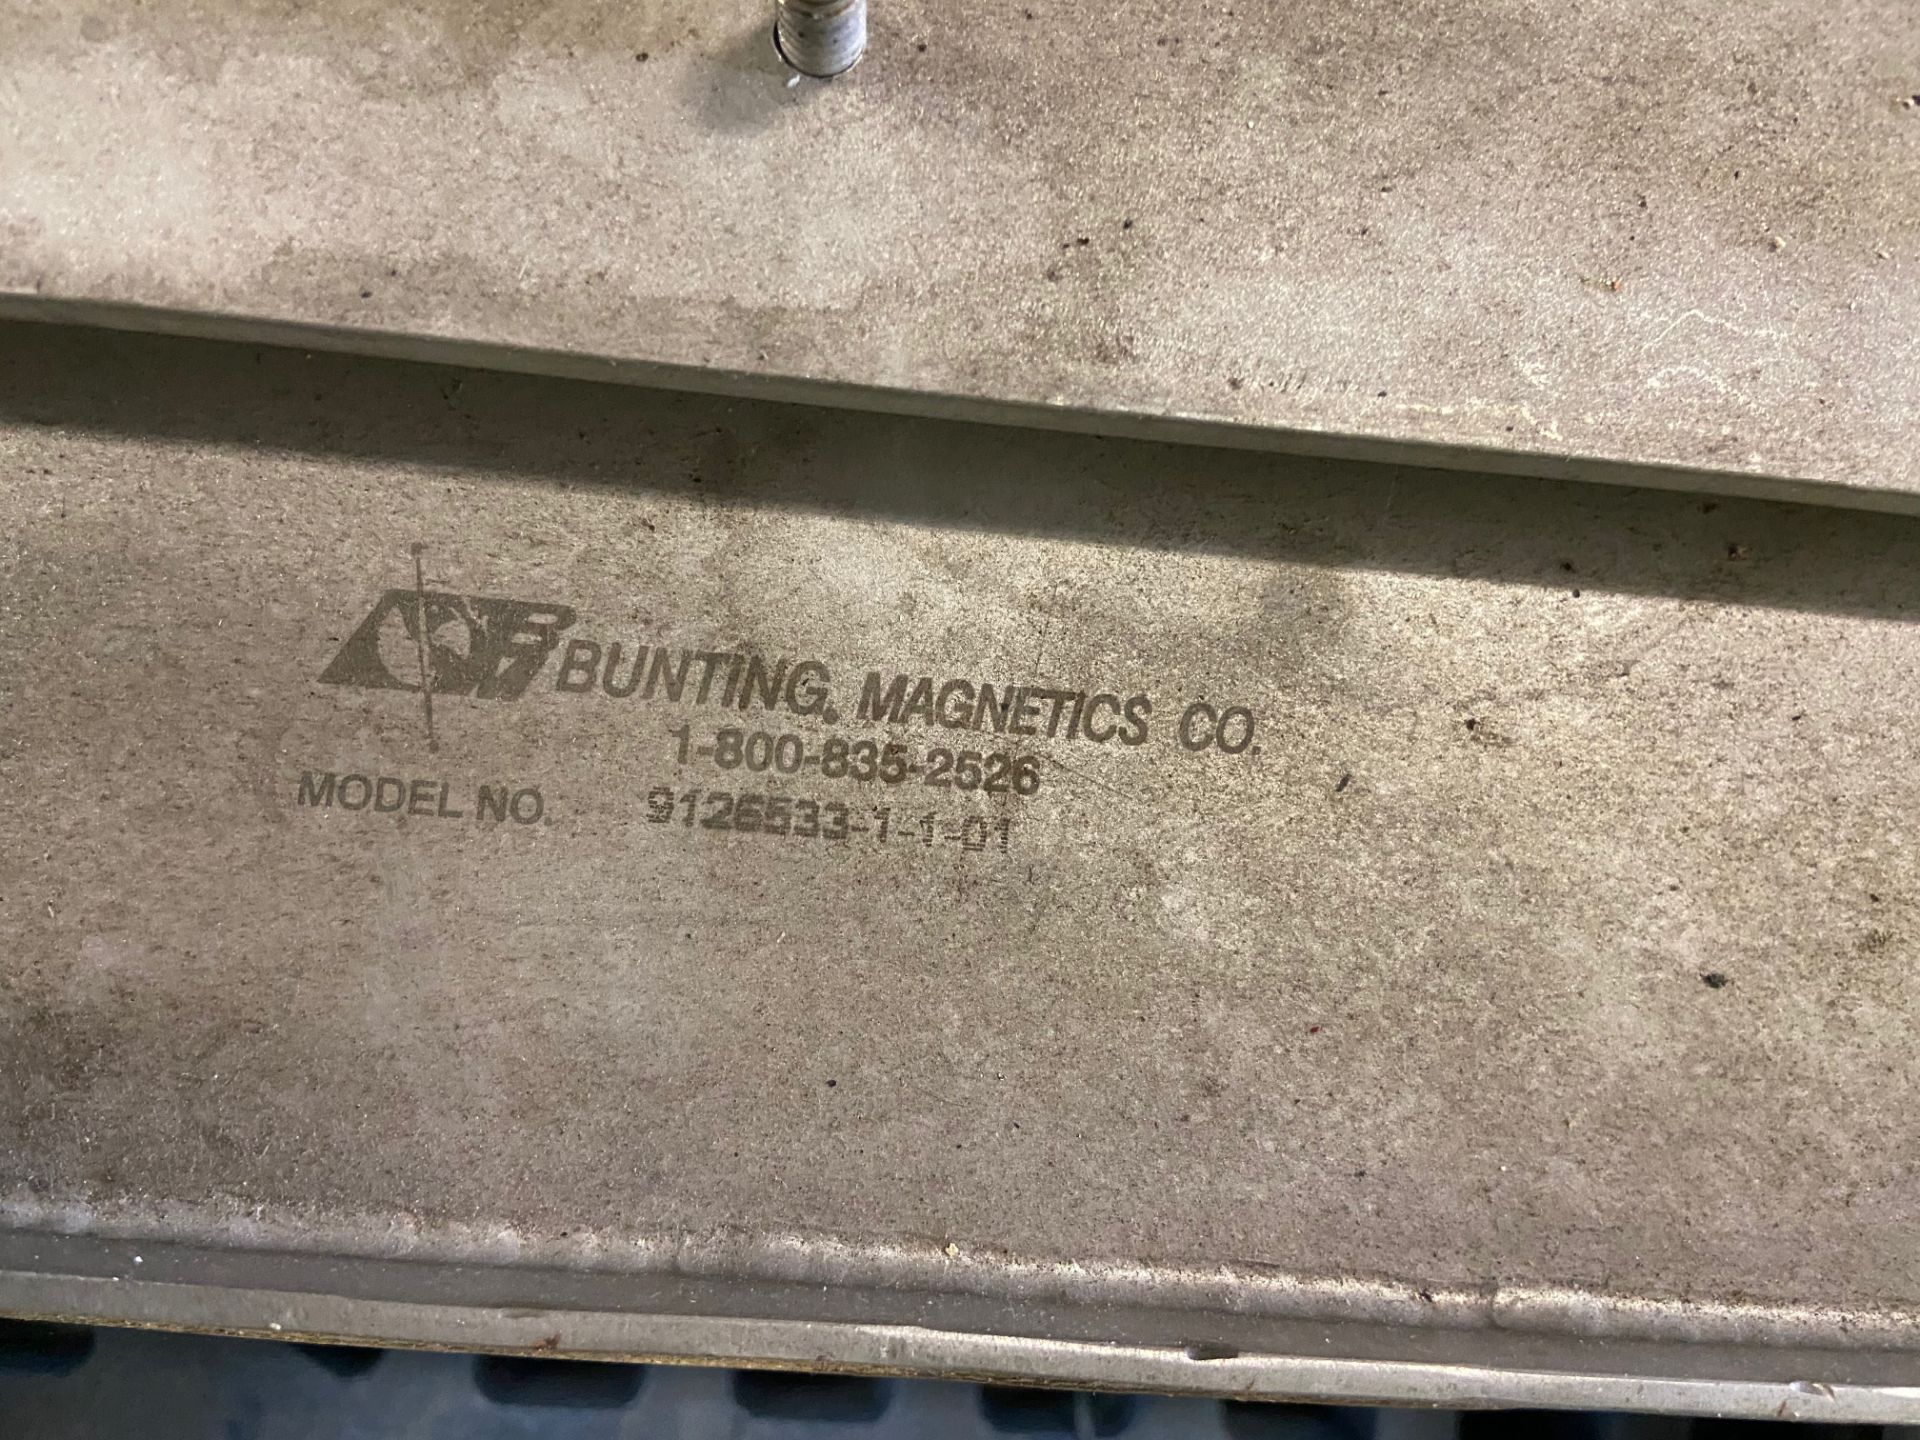 Drawer Magnet, Bunting Magnetics Co Model# 9126533-1-1-01, (Located in Oelwein, IA) (Rigging & Load - Image 3 of 4